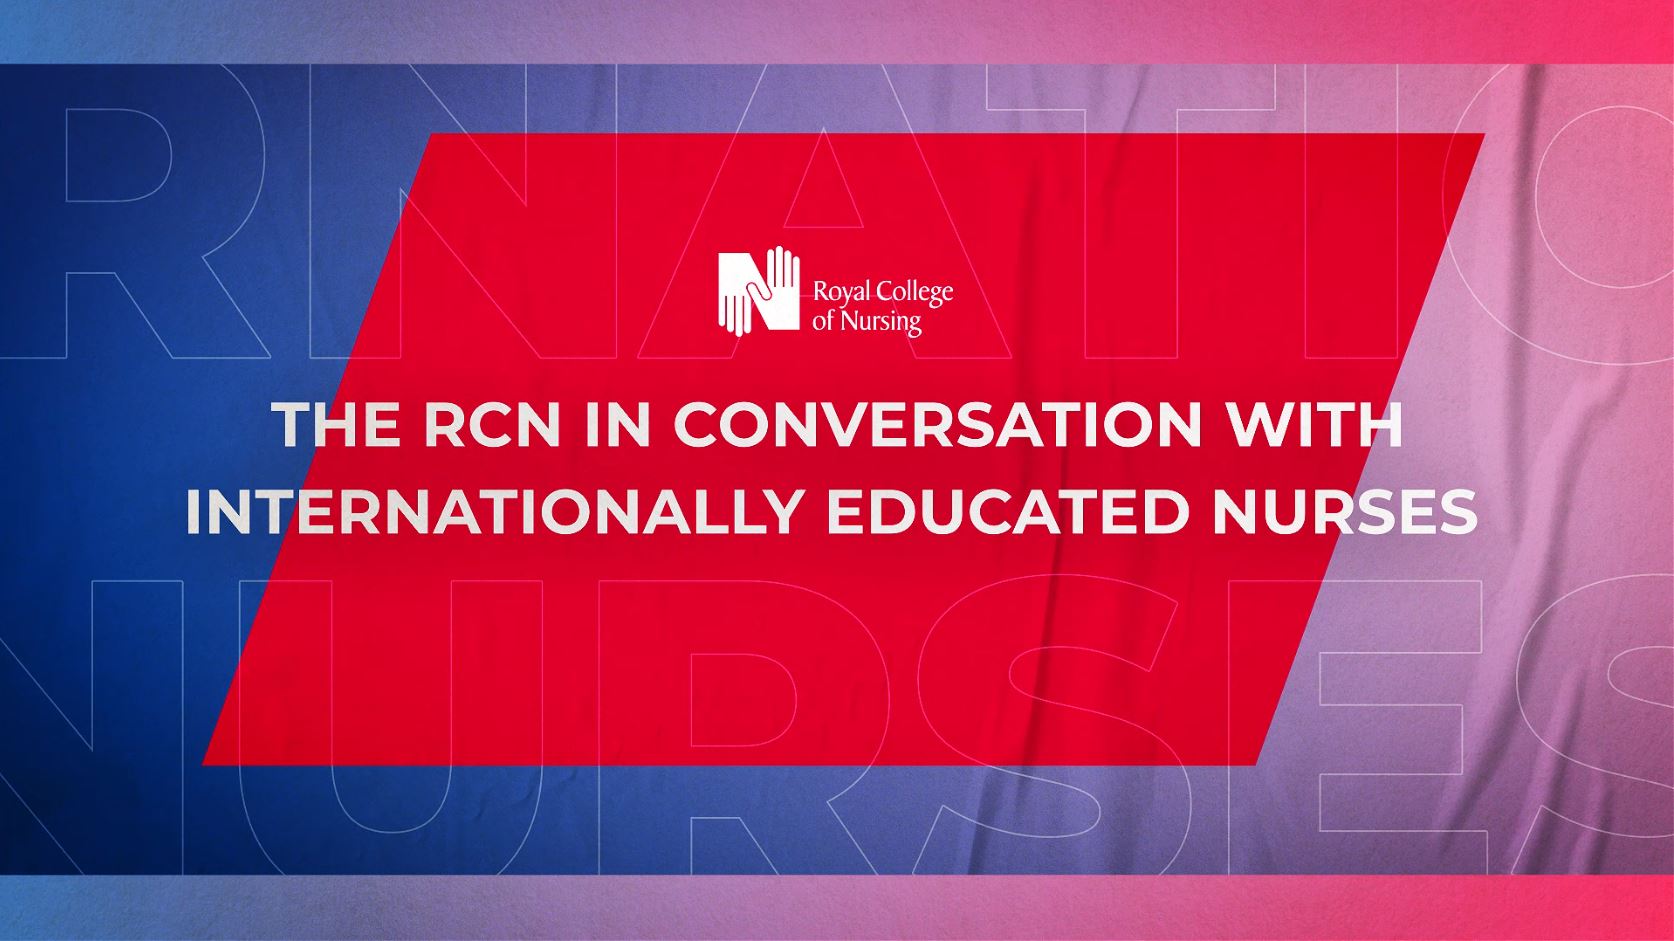 The RCN in conversation with internationally educated nurses